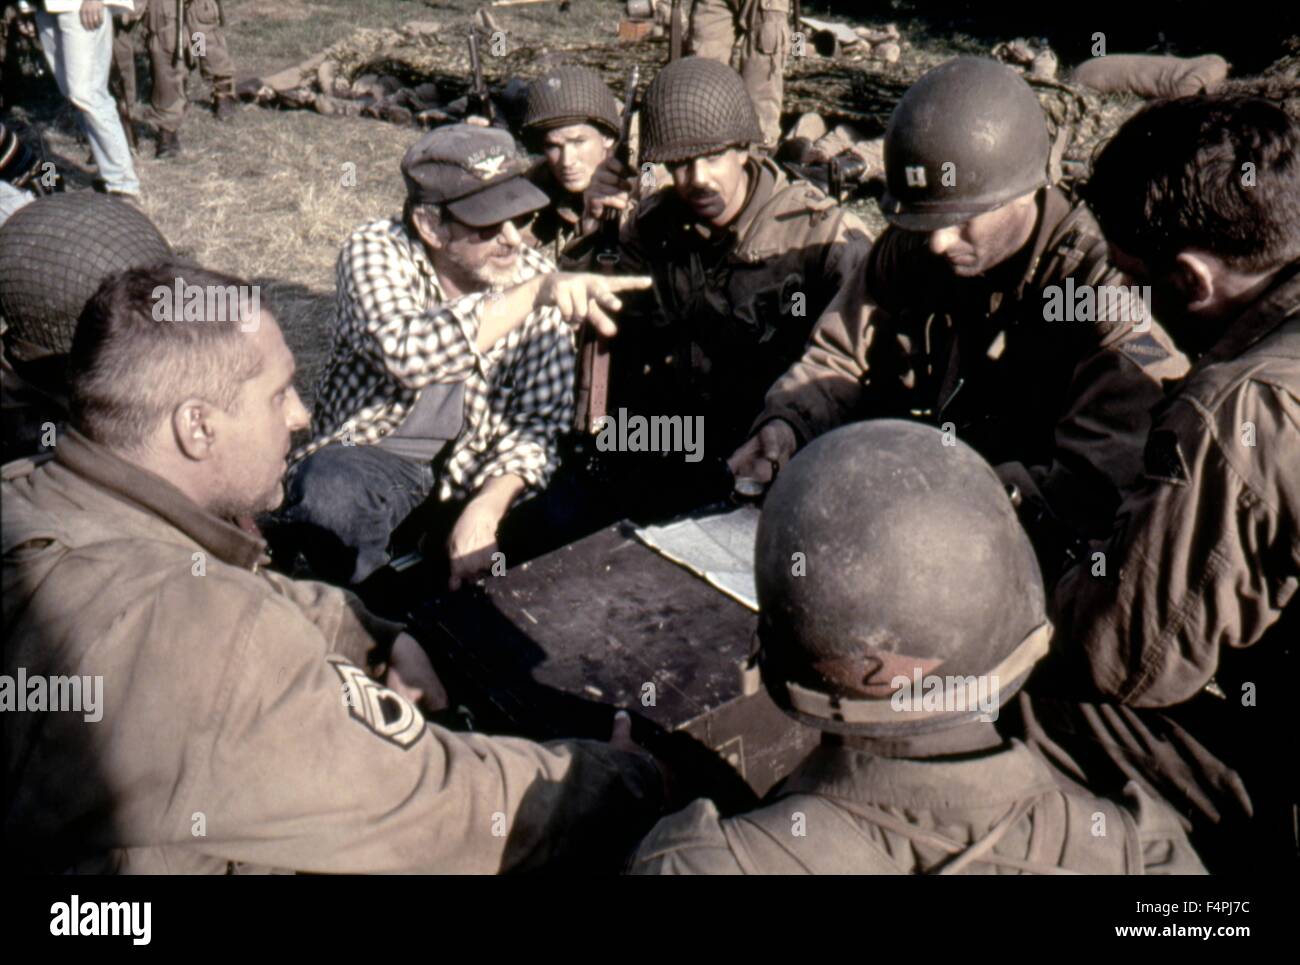 On the set, Steven Spielberg with Adam Goldberg, Tom Hanks and Tom Sizemore  / Saving Private Ryan / 1998 directed by Steven Spielberg [Dreamworks LLC  /Paramount Pictures] Stock Photo - Alamy